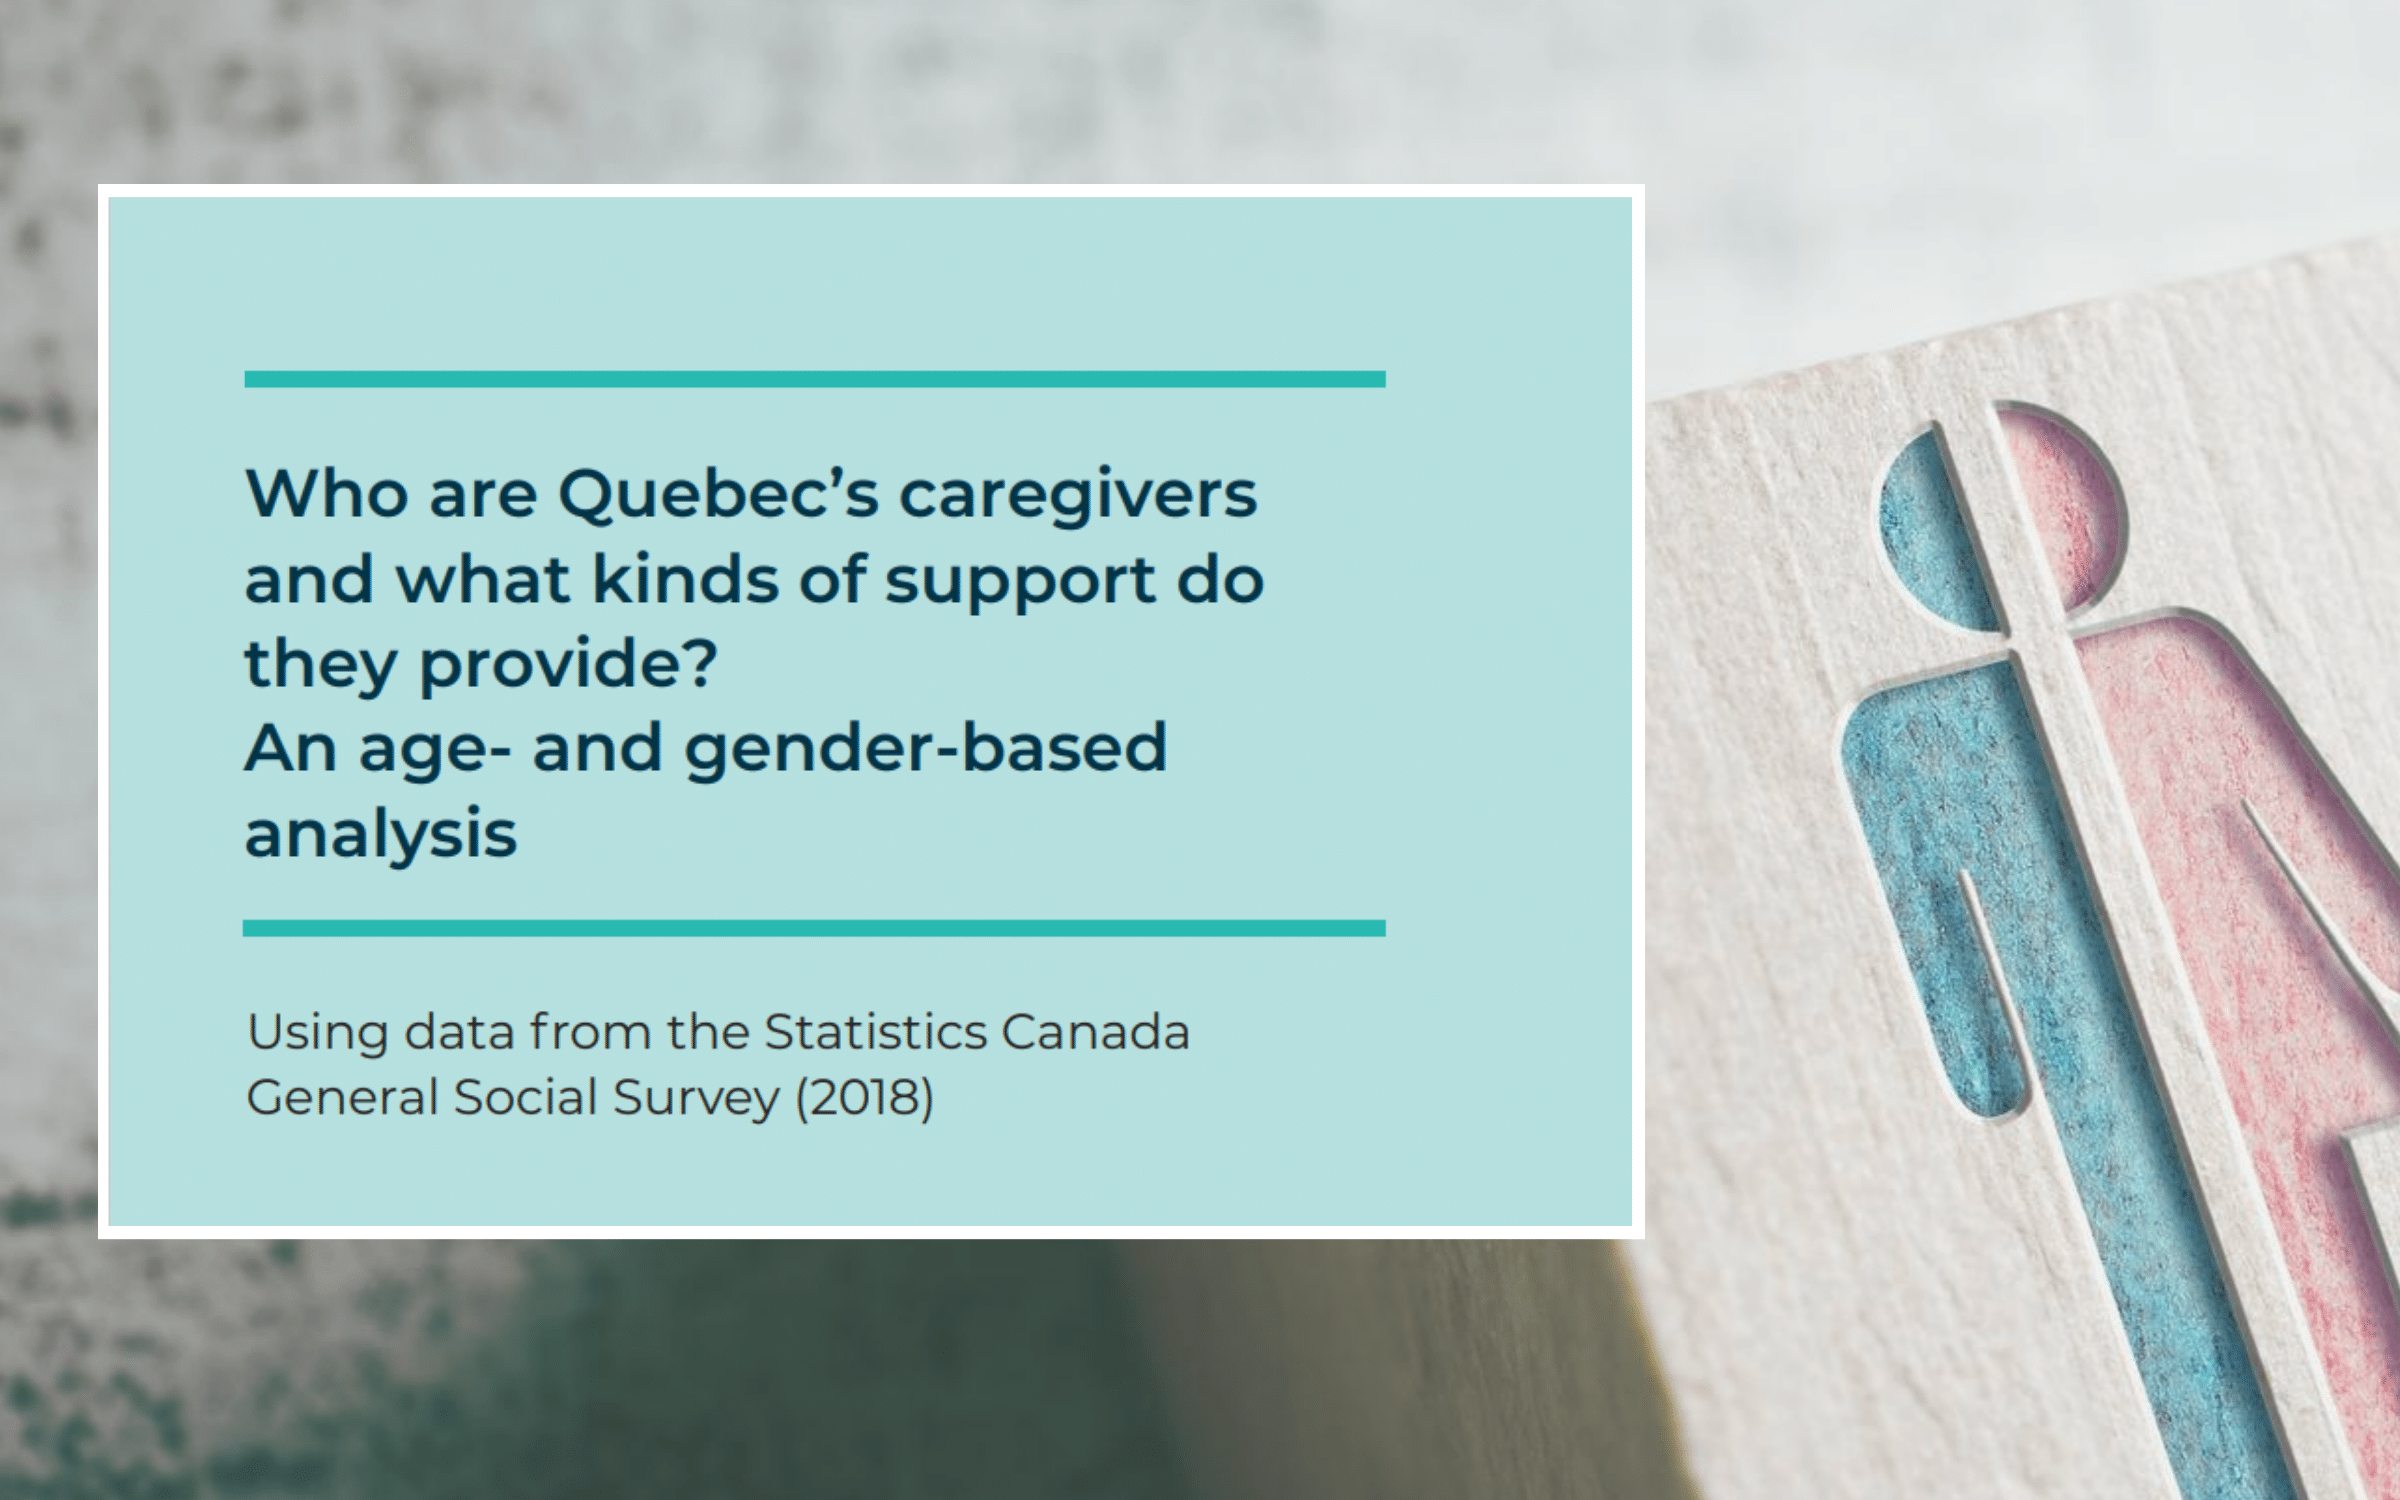 Now available in English: Who are Quebec’s caregivers and what kinds of support do they provide? An age- and gender-based analysis